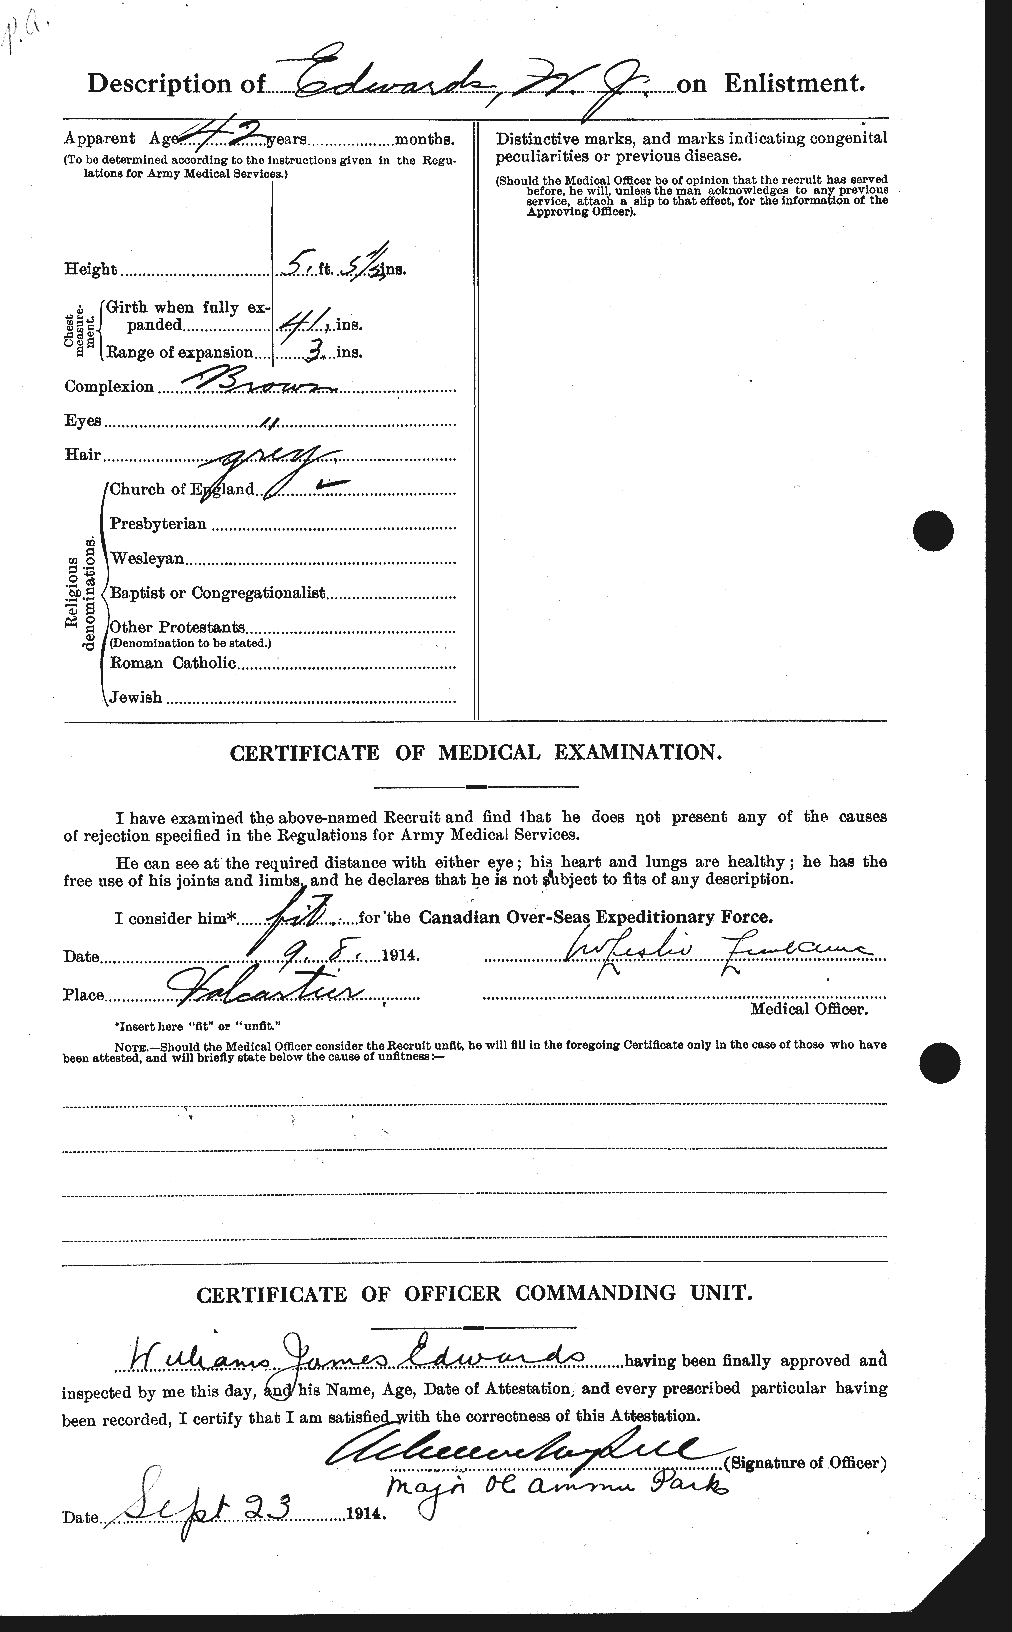 Personnel Records of the First World War - CEF 311922b